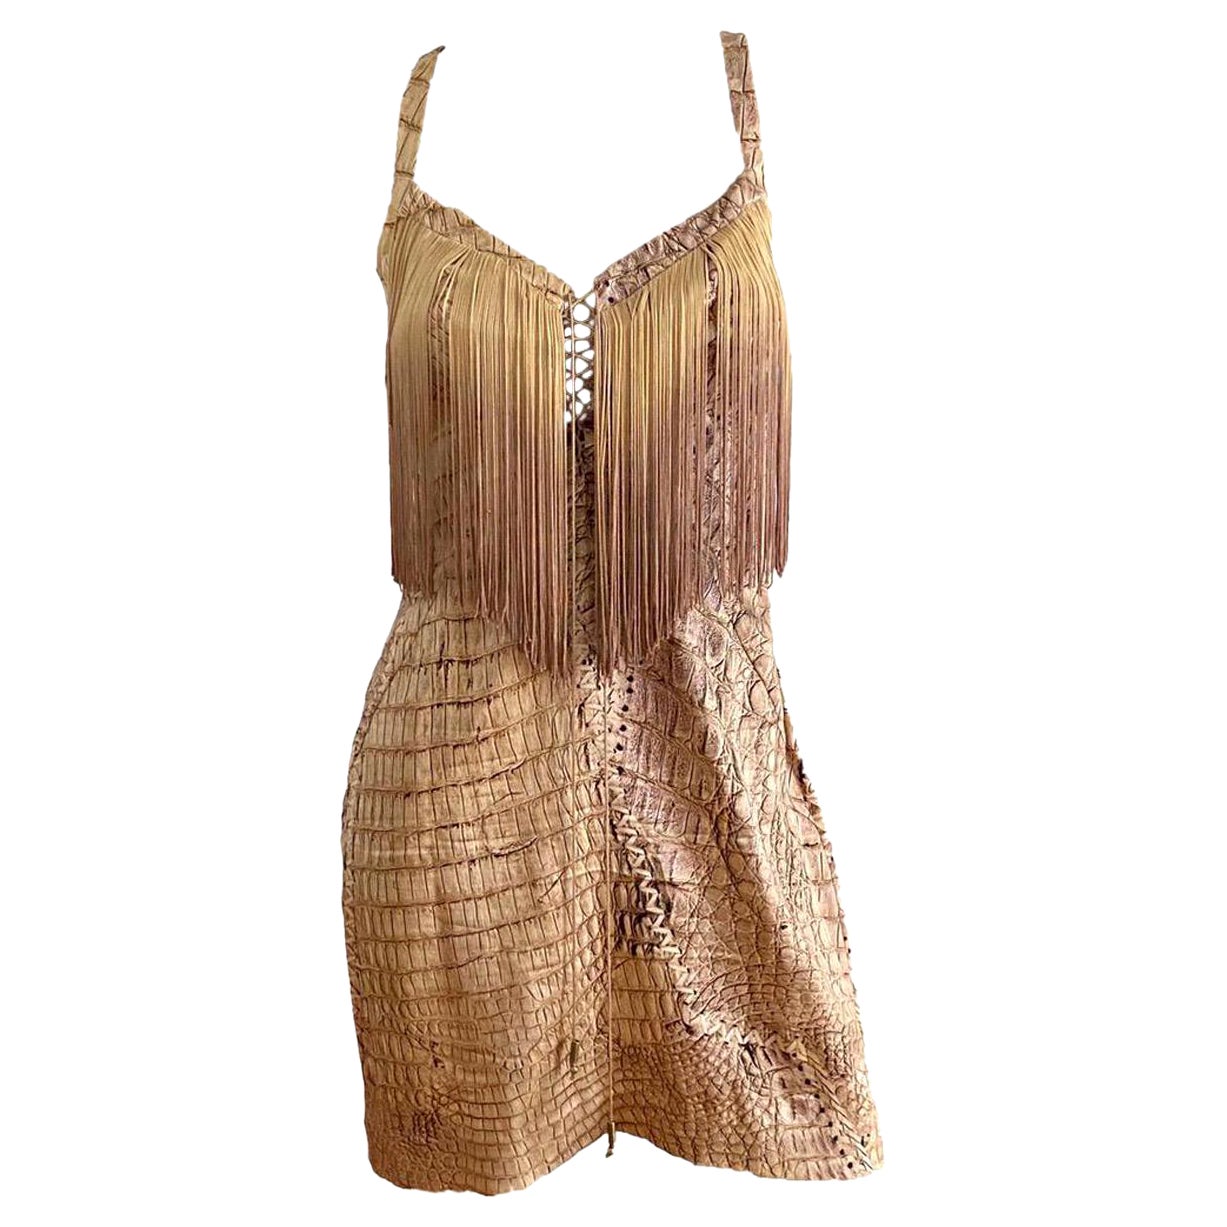 Roberto Cavalli S/S 2011 Lace-Up front Fringed Croc dress For Sale